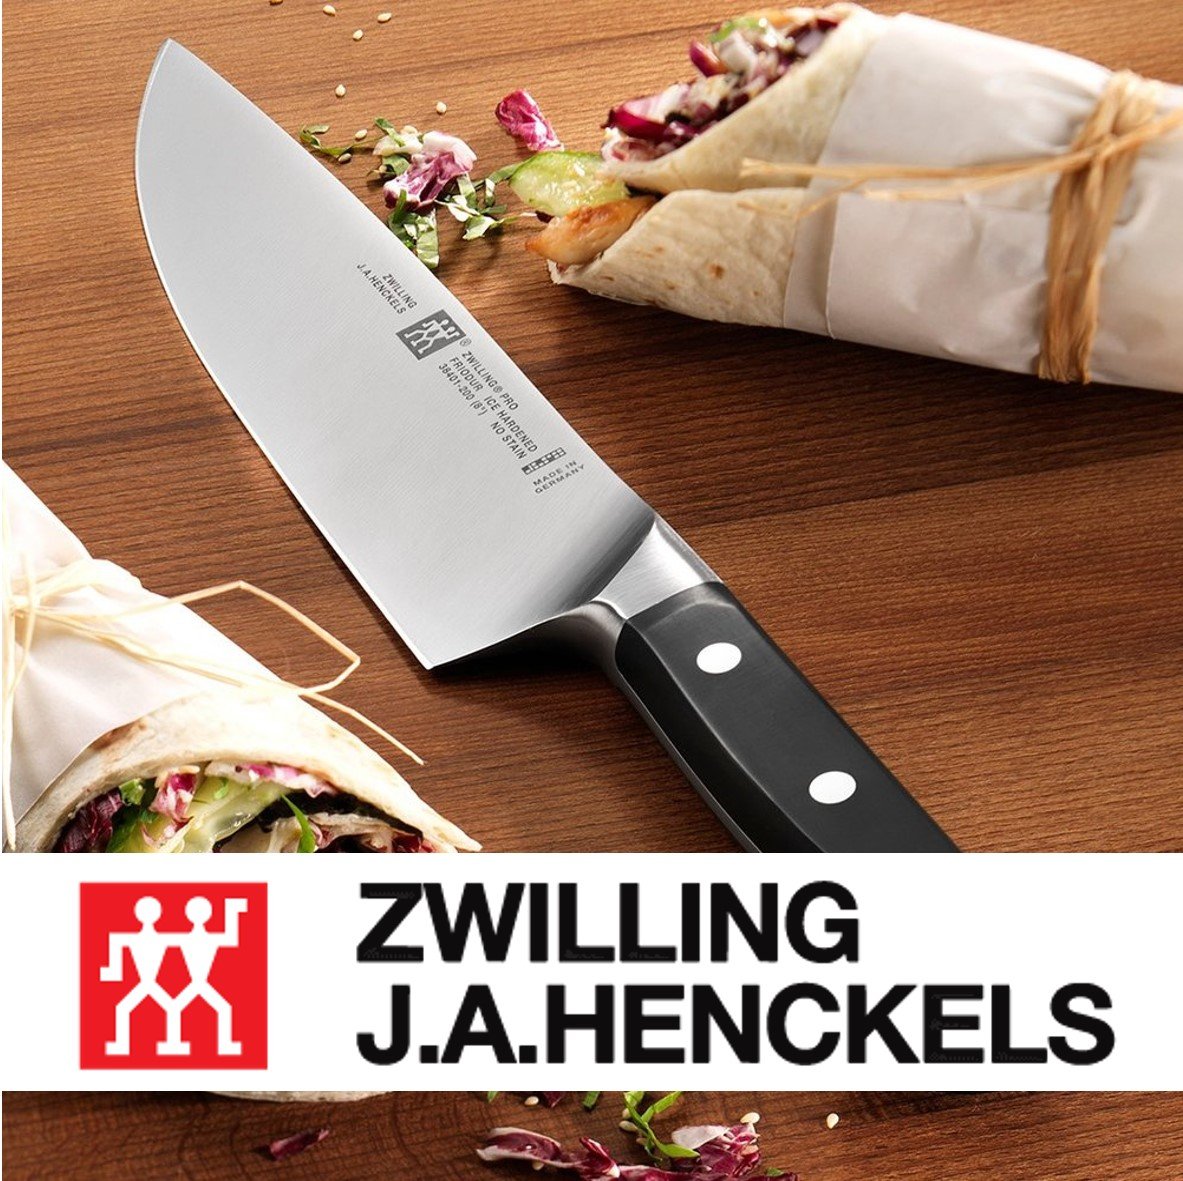 Zwilling® JA Henckels Knives - The Cotswold Knife Company